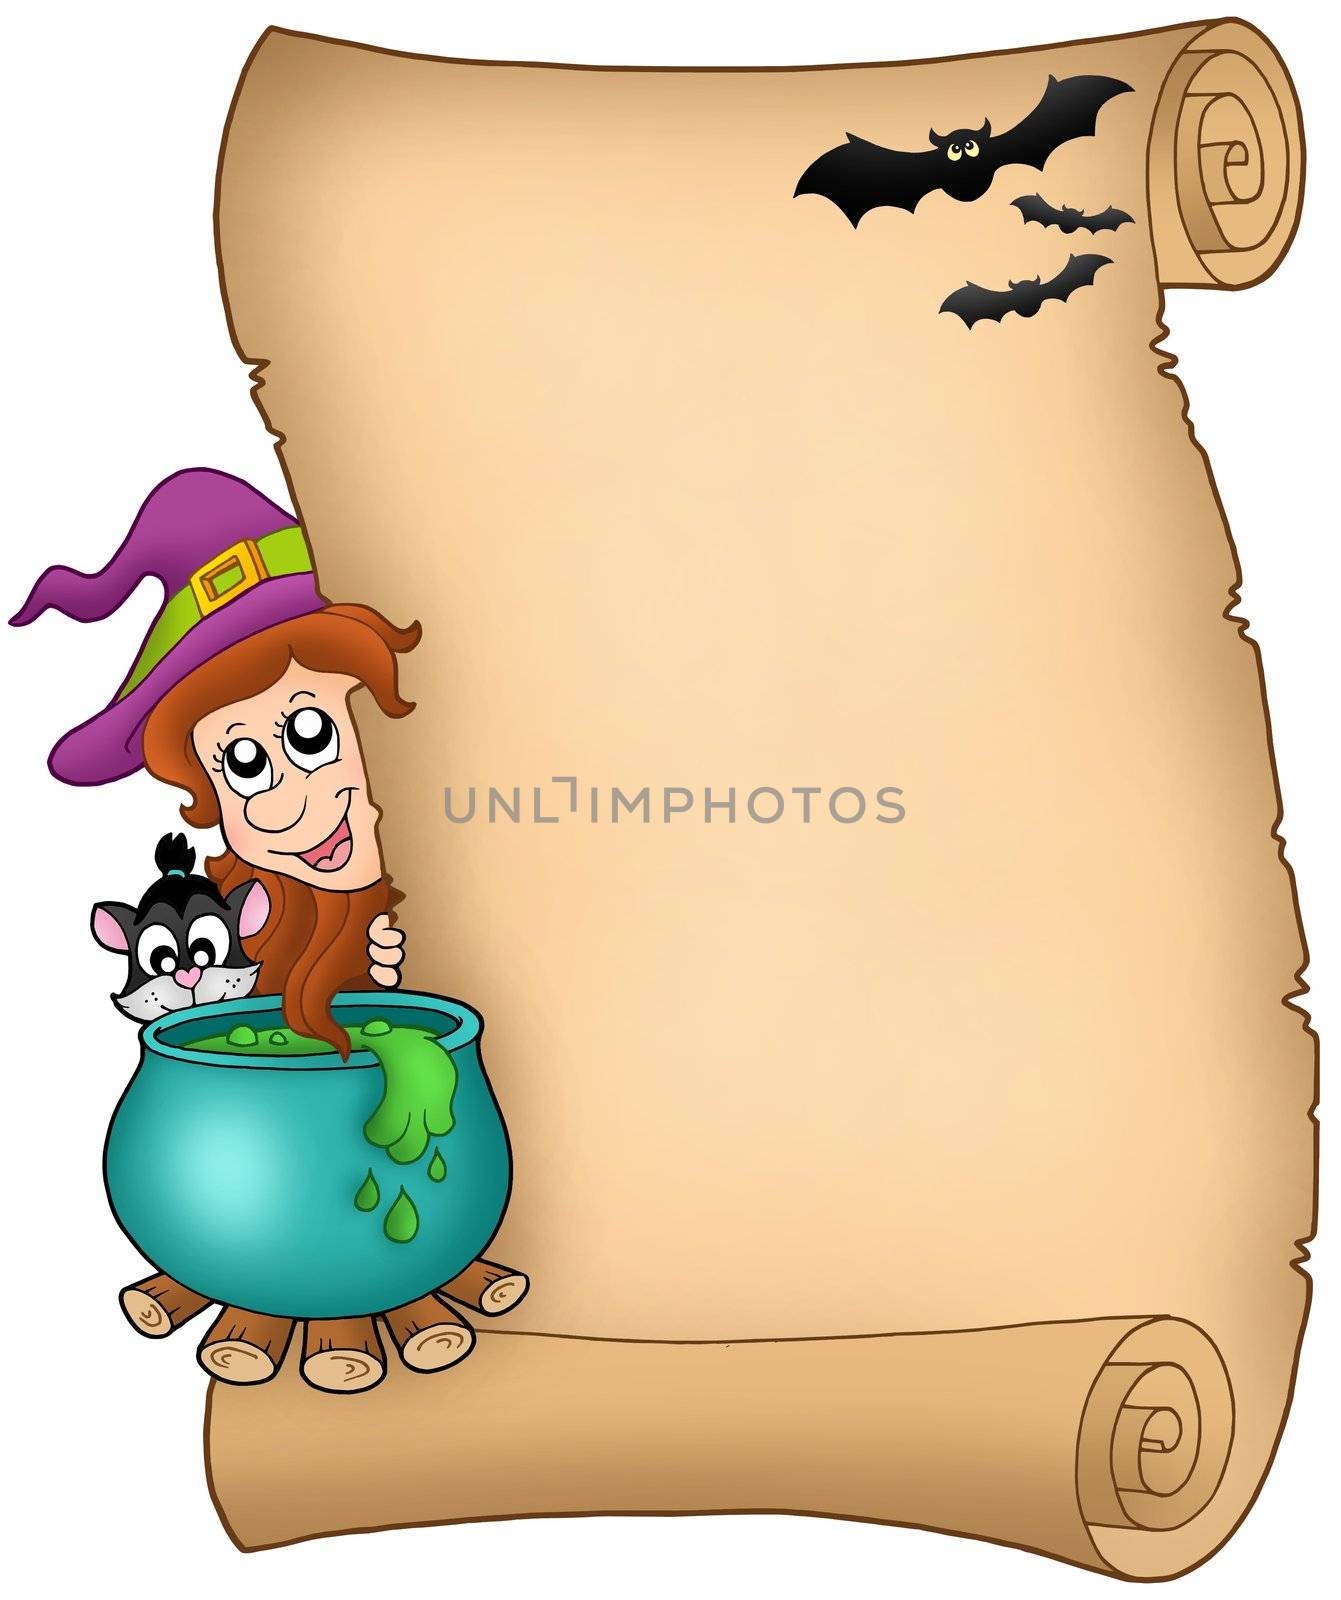 Halloween parchment 3 by clairev